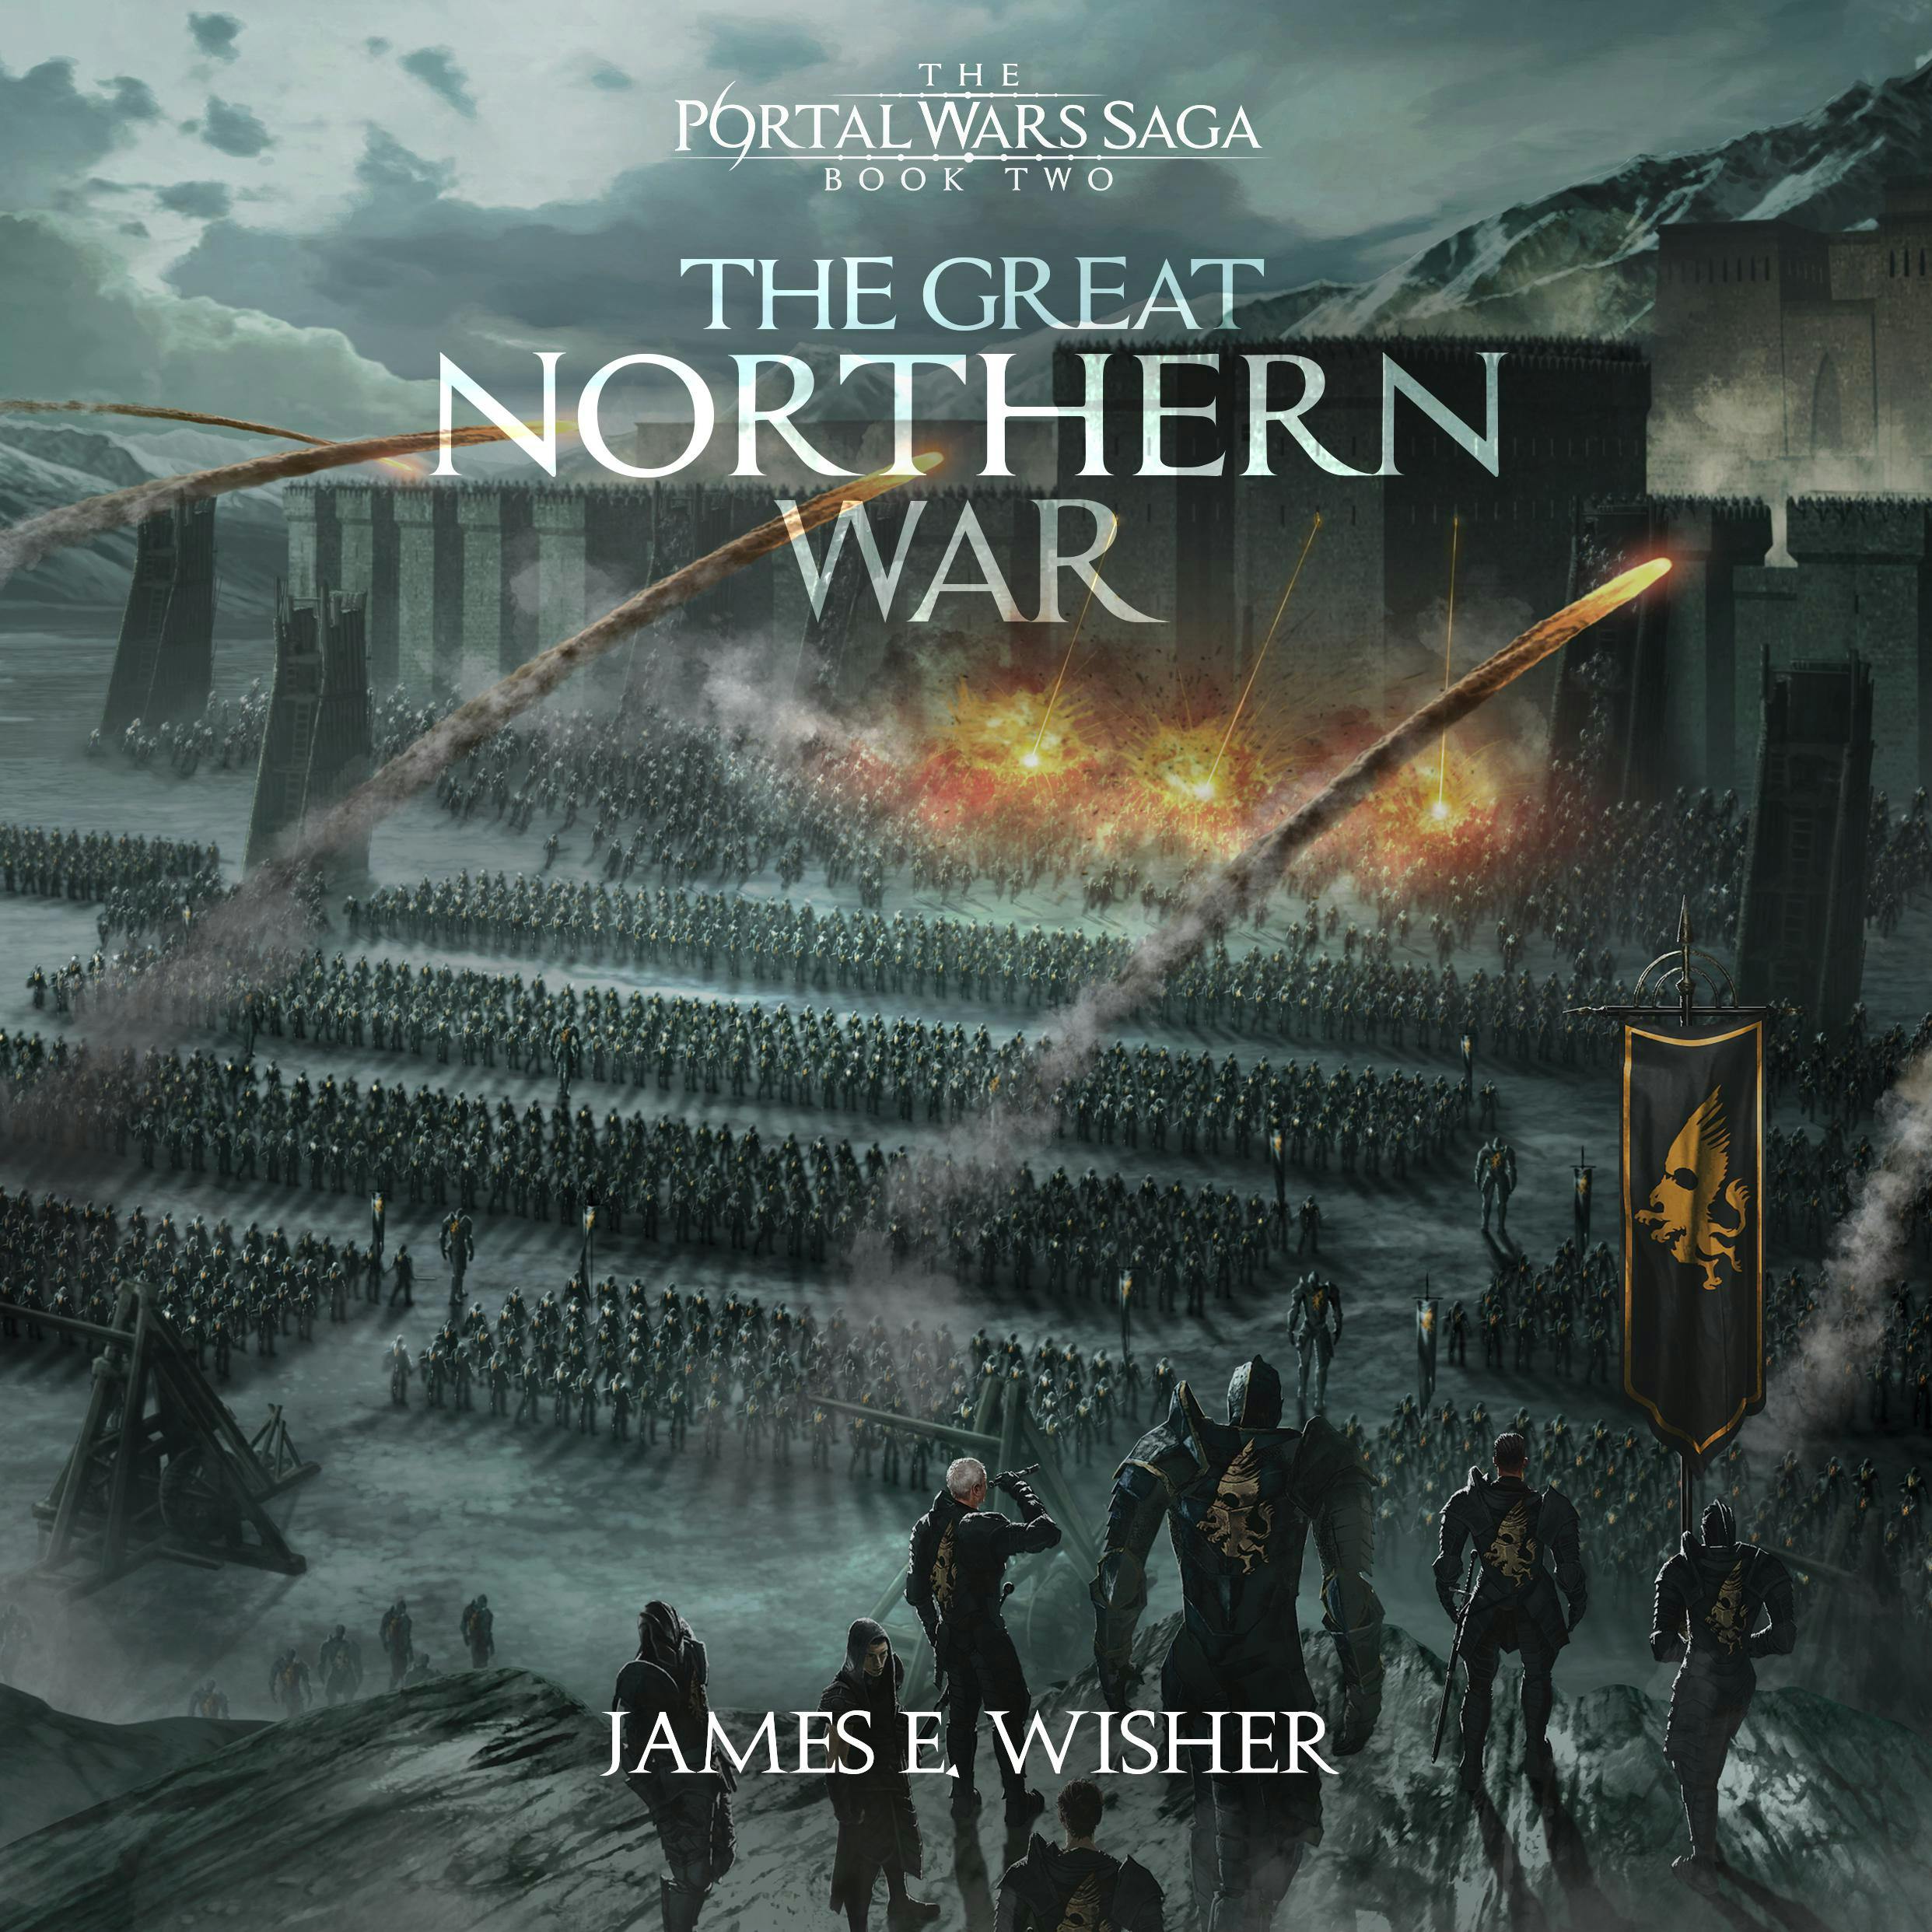 The Great Northern War - James E. Wisher